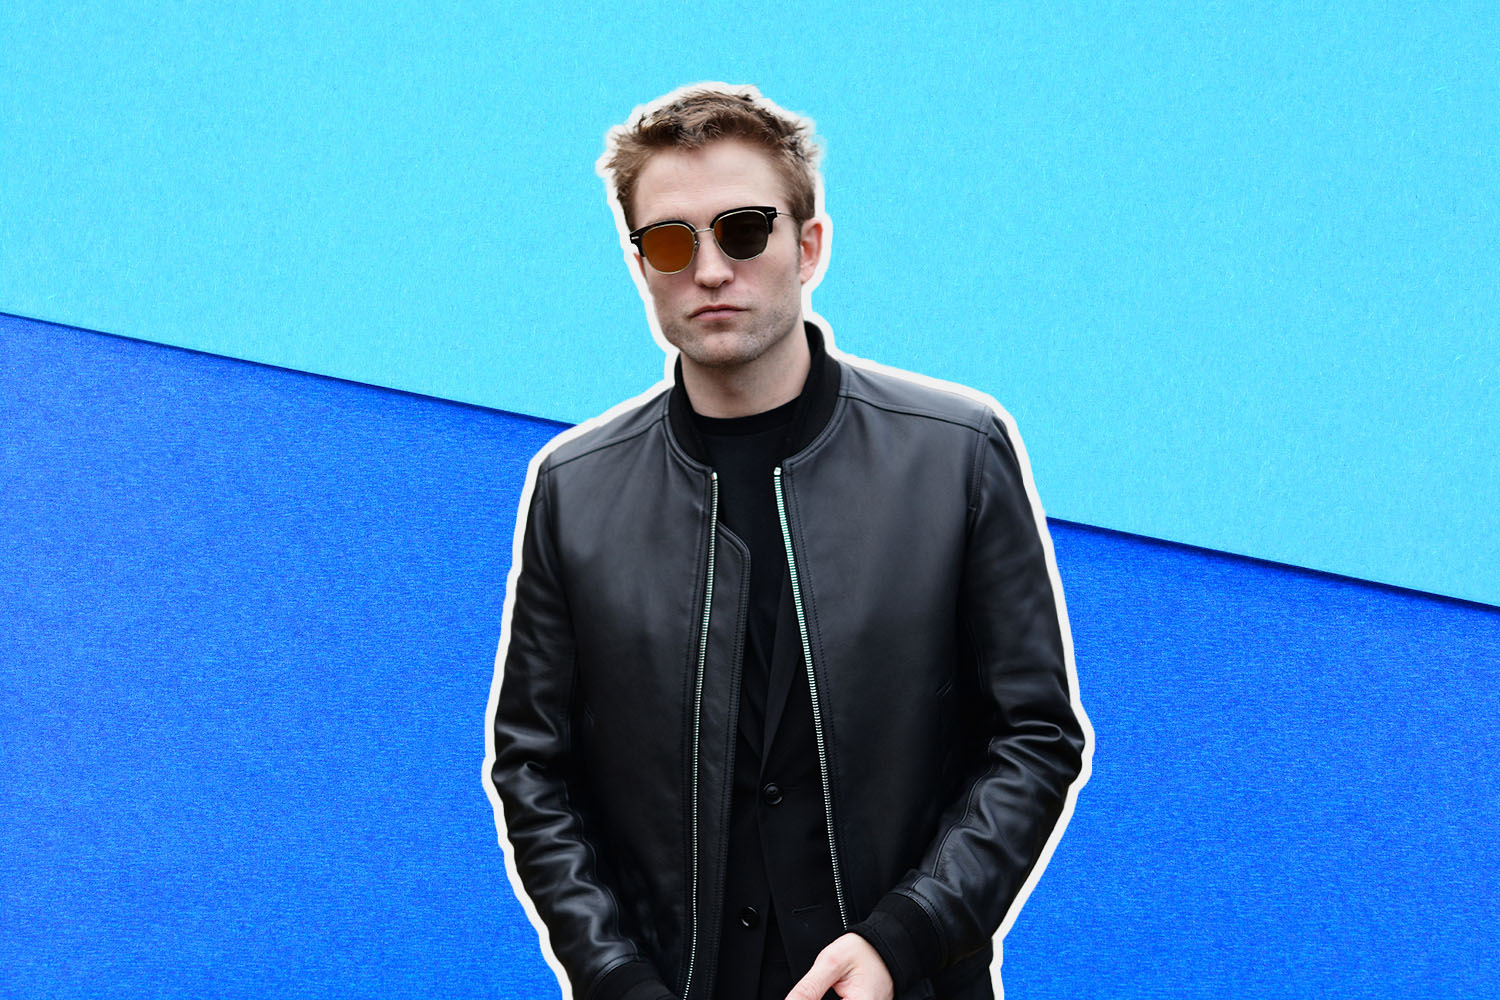 a photo of robert pattenson wearing sunglasses agaisnt a two-toned blue background